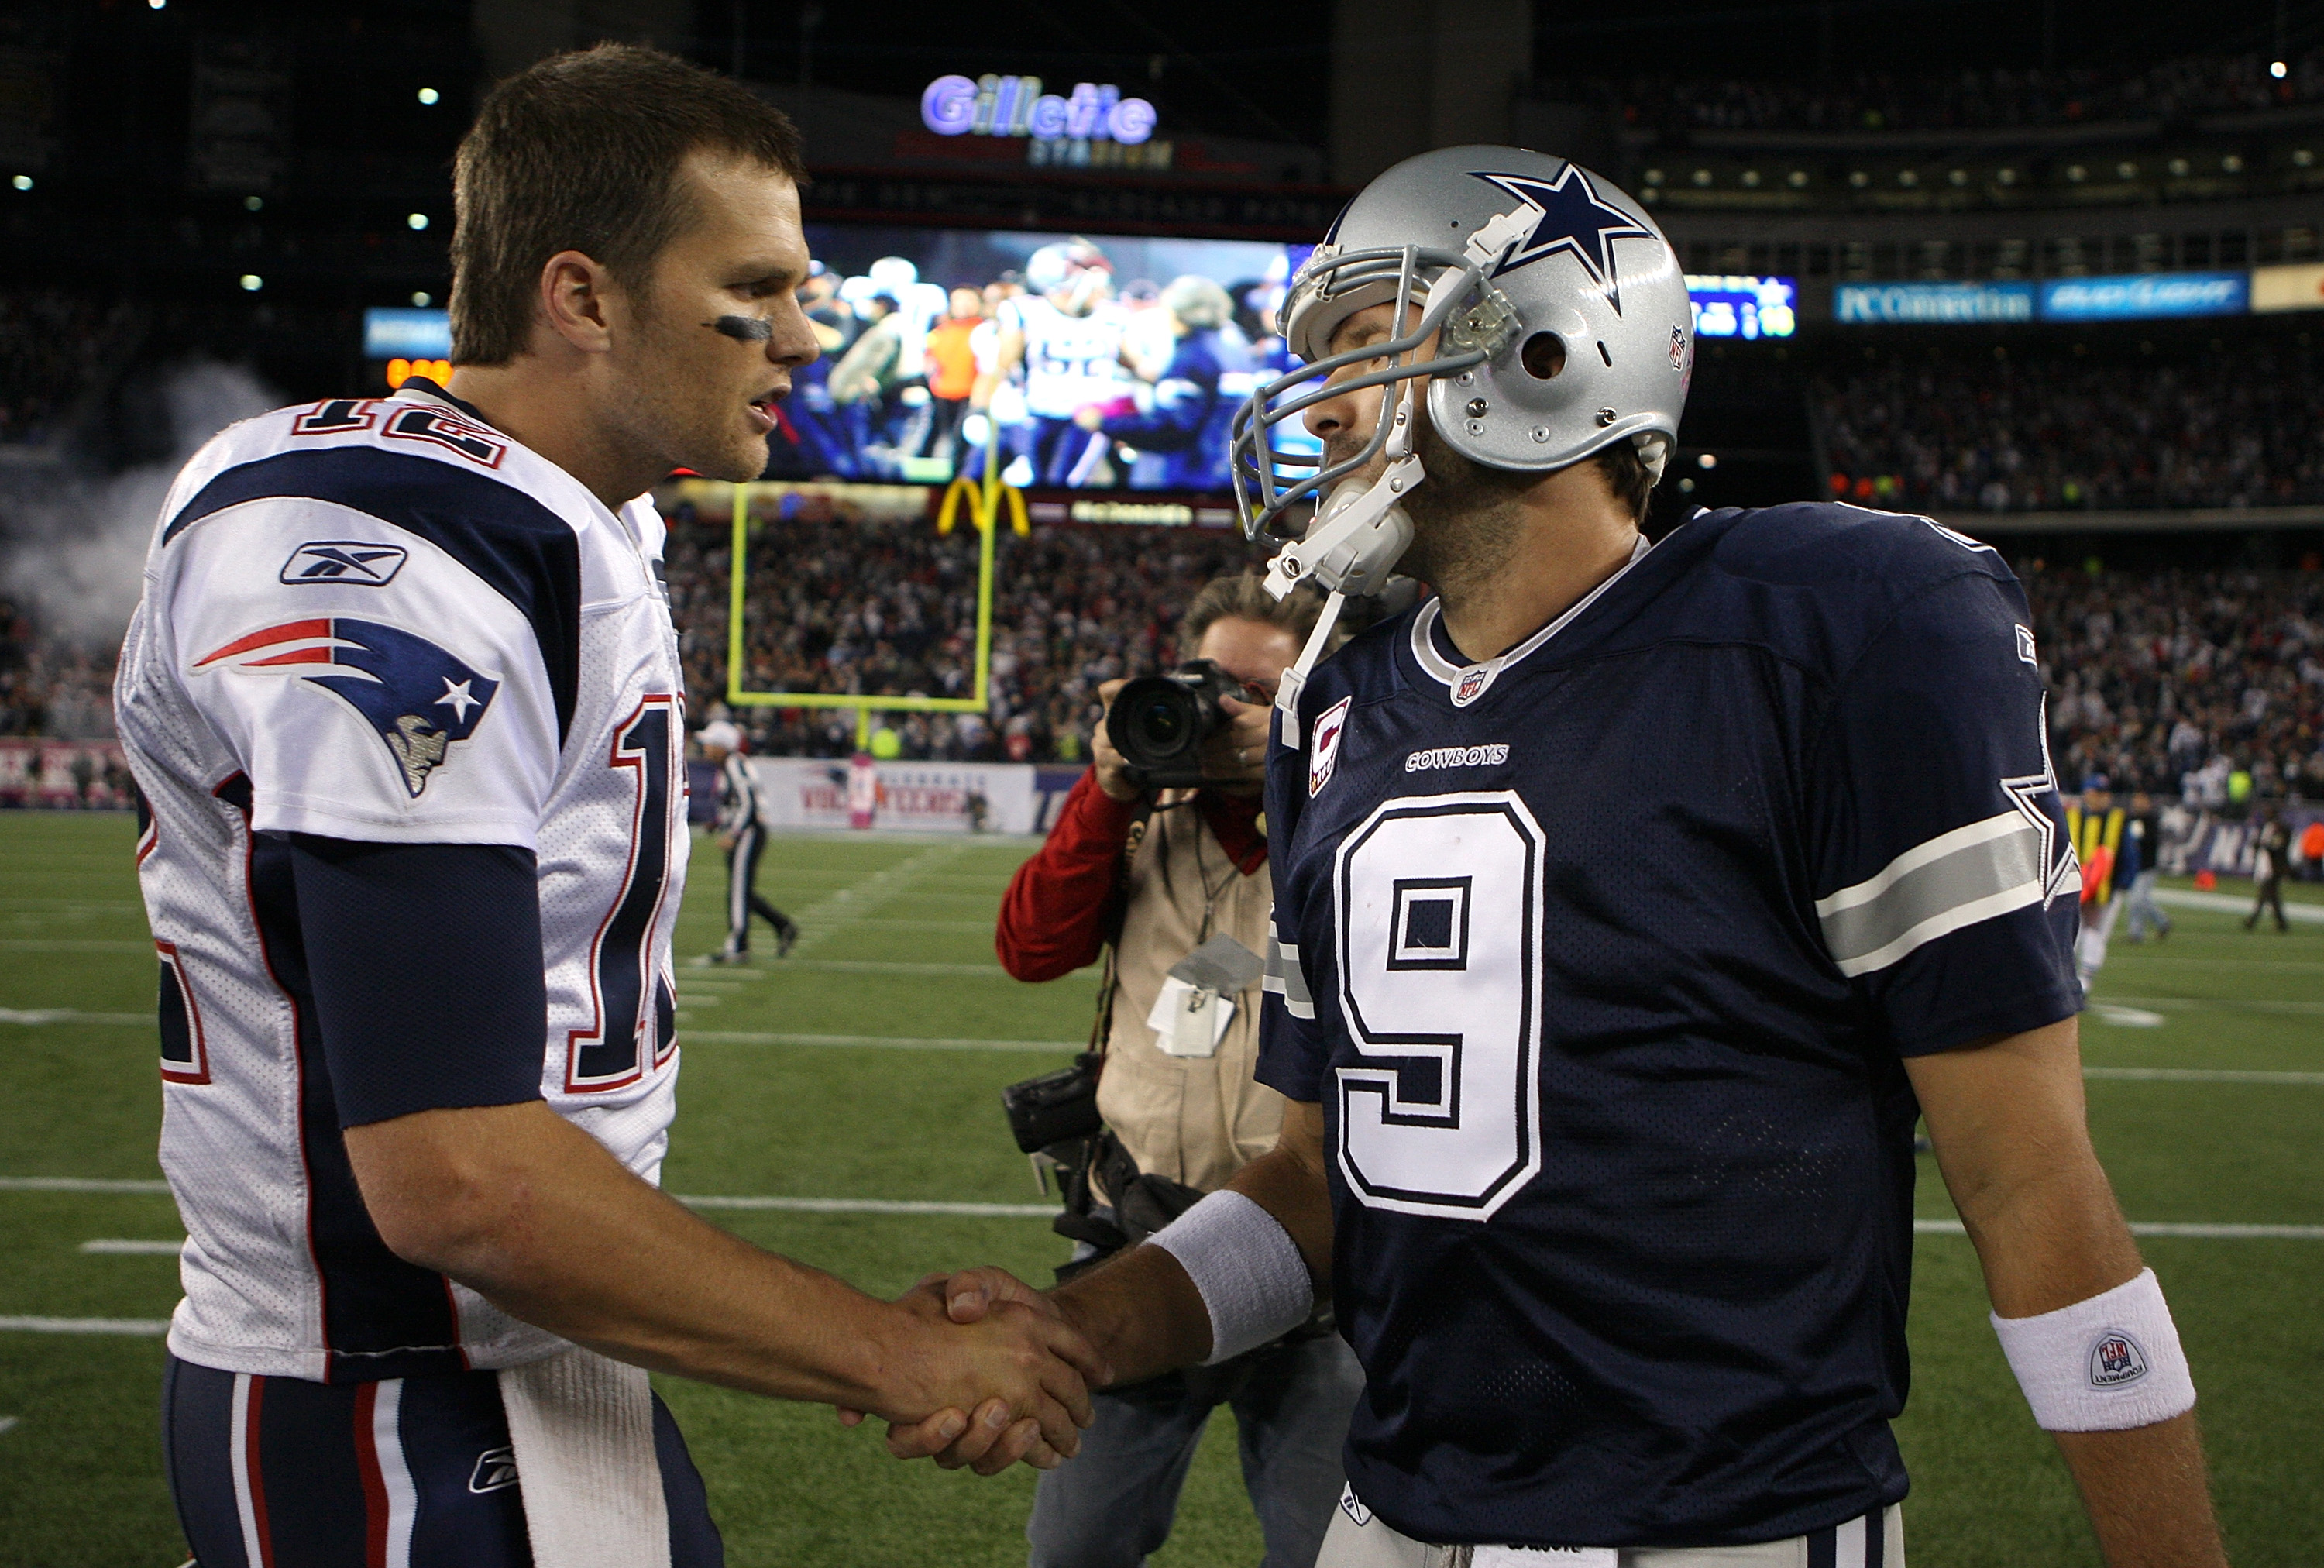 ORG XMIT: 119009034 FOXBORO, MA - OCTOBER 16: Tom Brady #12 of the New England Patriots shakes hands with Tony Romo #9 of the Dallas Cowboys at Gillette Stadium on October 16, 2011 in Foxboro, Massachusetts. The Patriots won 20-16. (Photo by Jim Rogash/Getty Images) ORIG FILE ID: 129390376